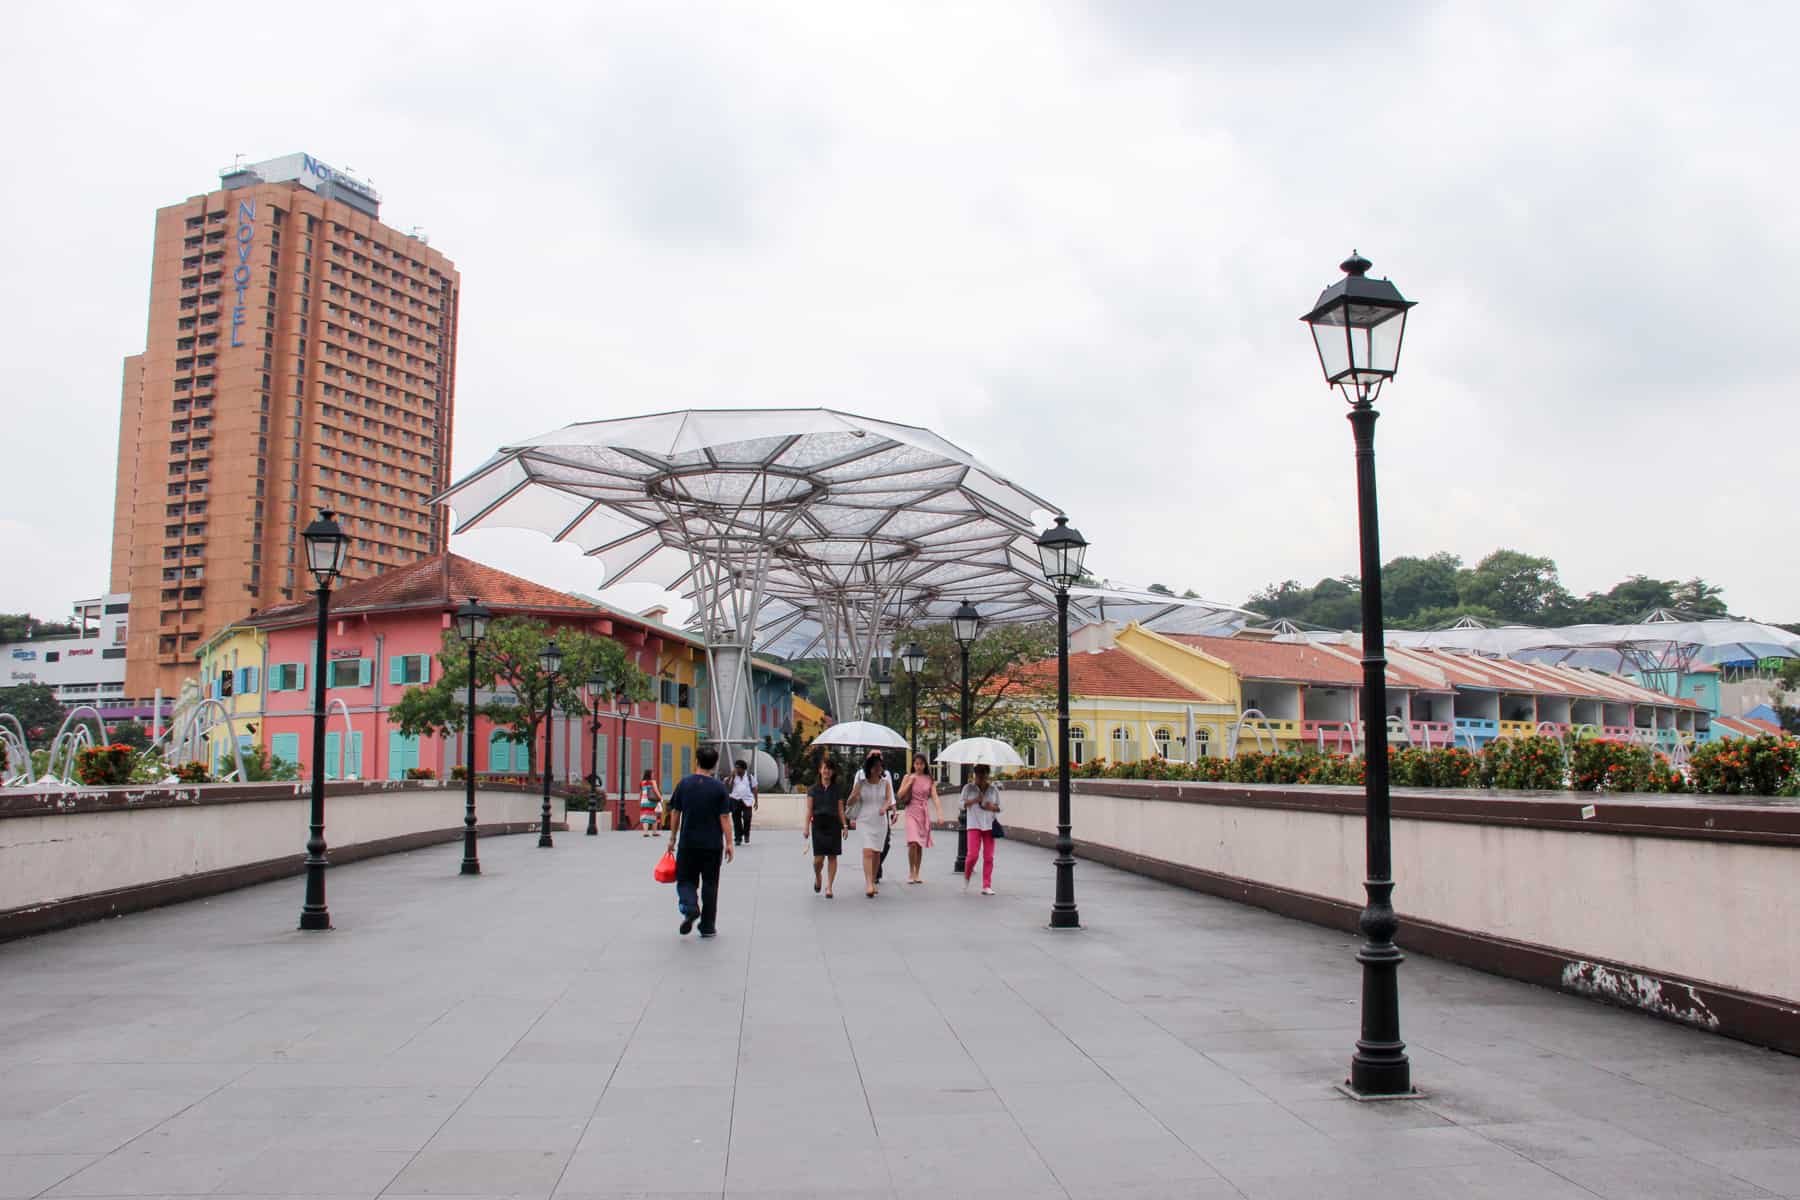 Five people, two holding umbrellas, walking towards some modern buildings in Singapore, the one on the path are shaped like metal trees